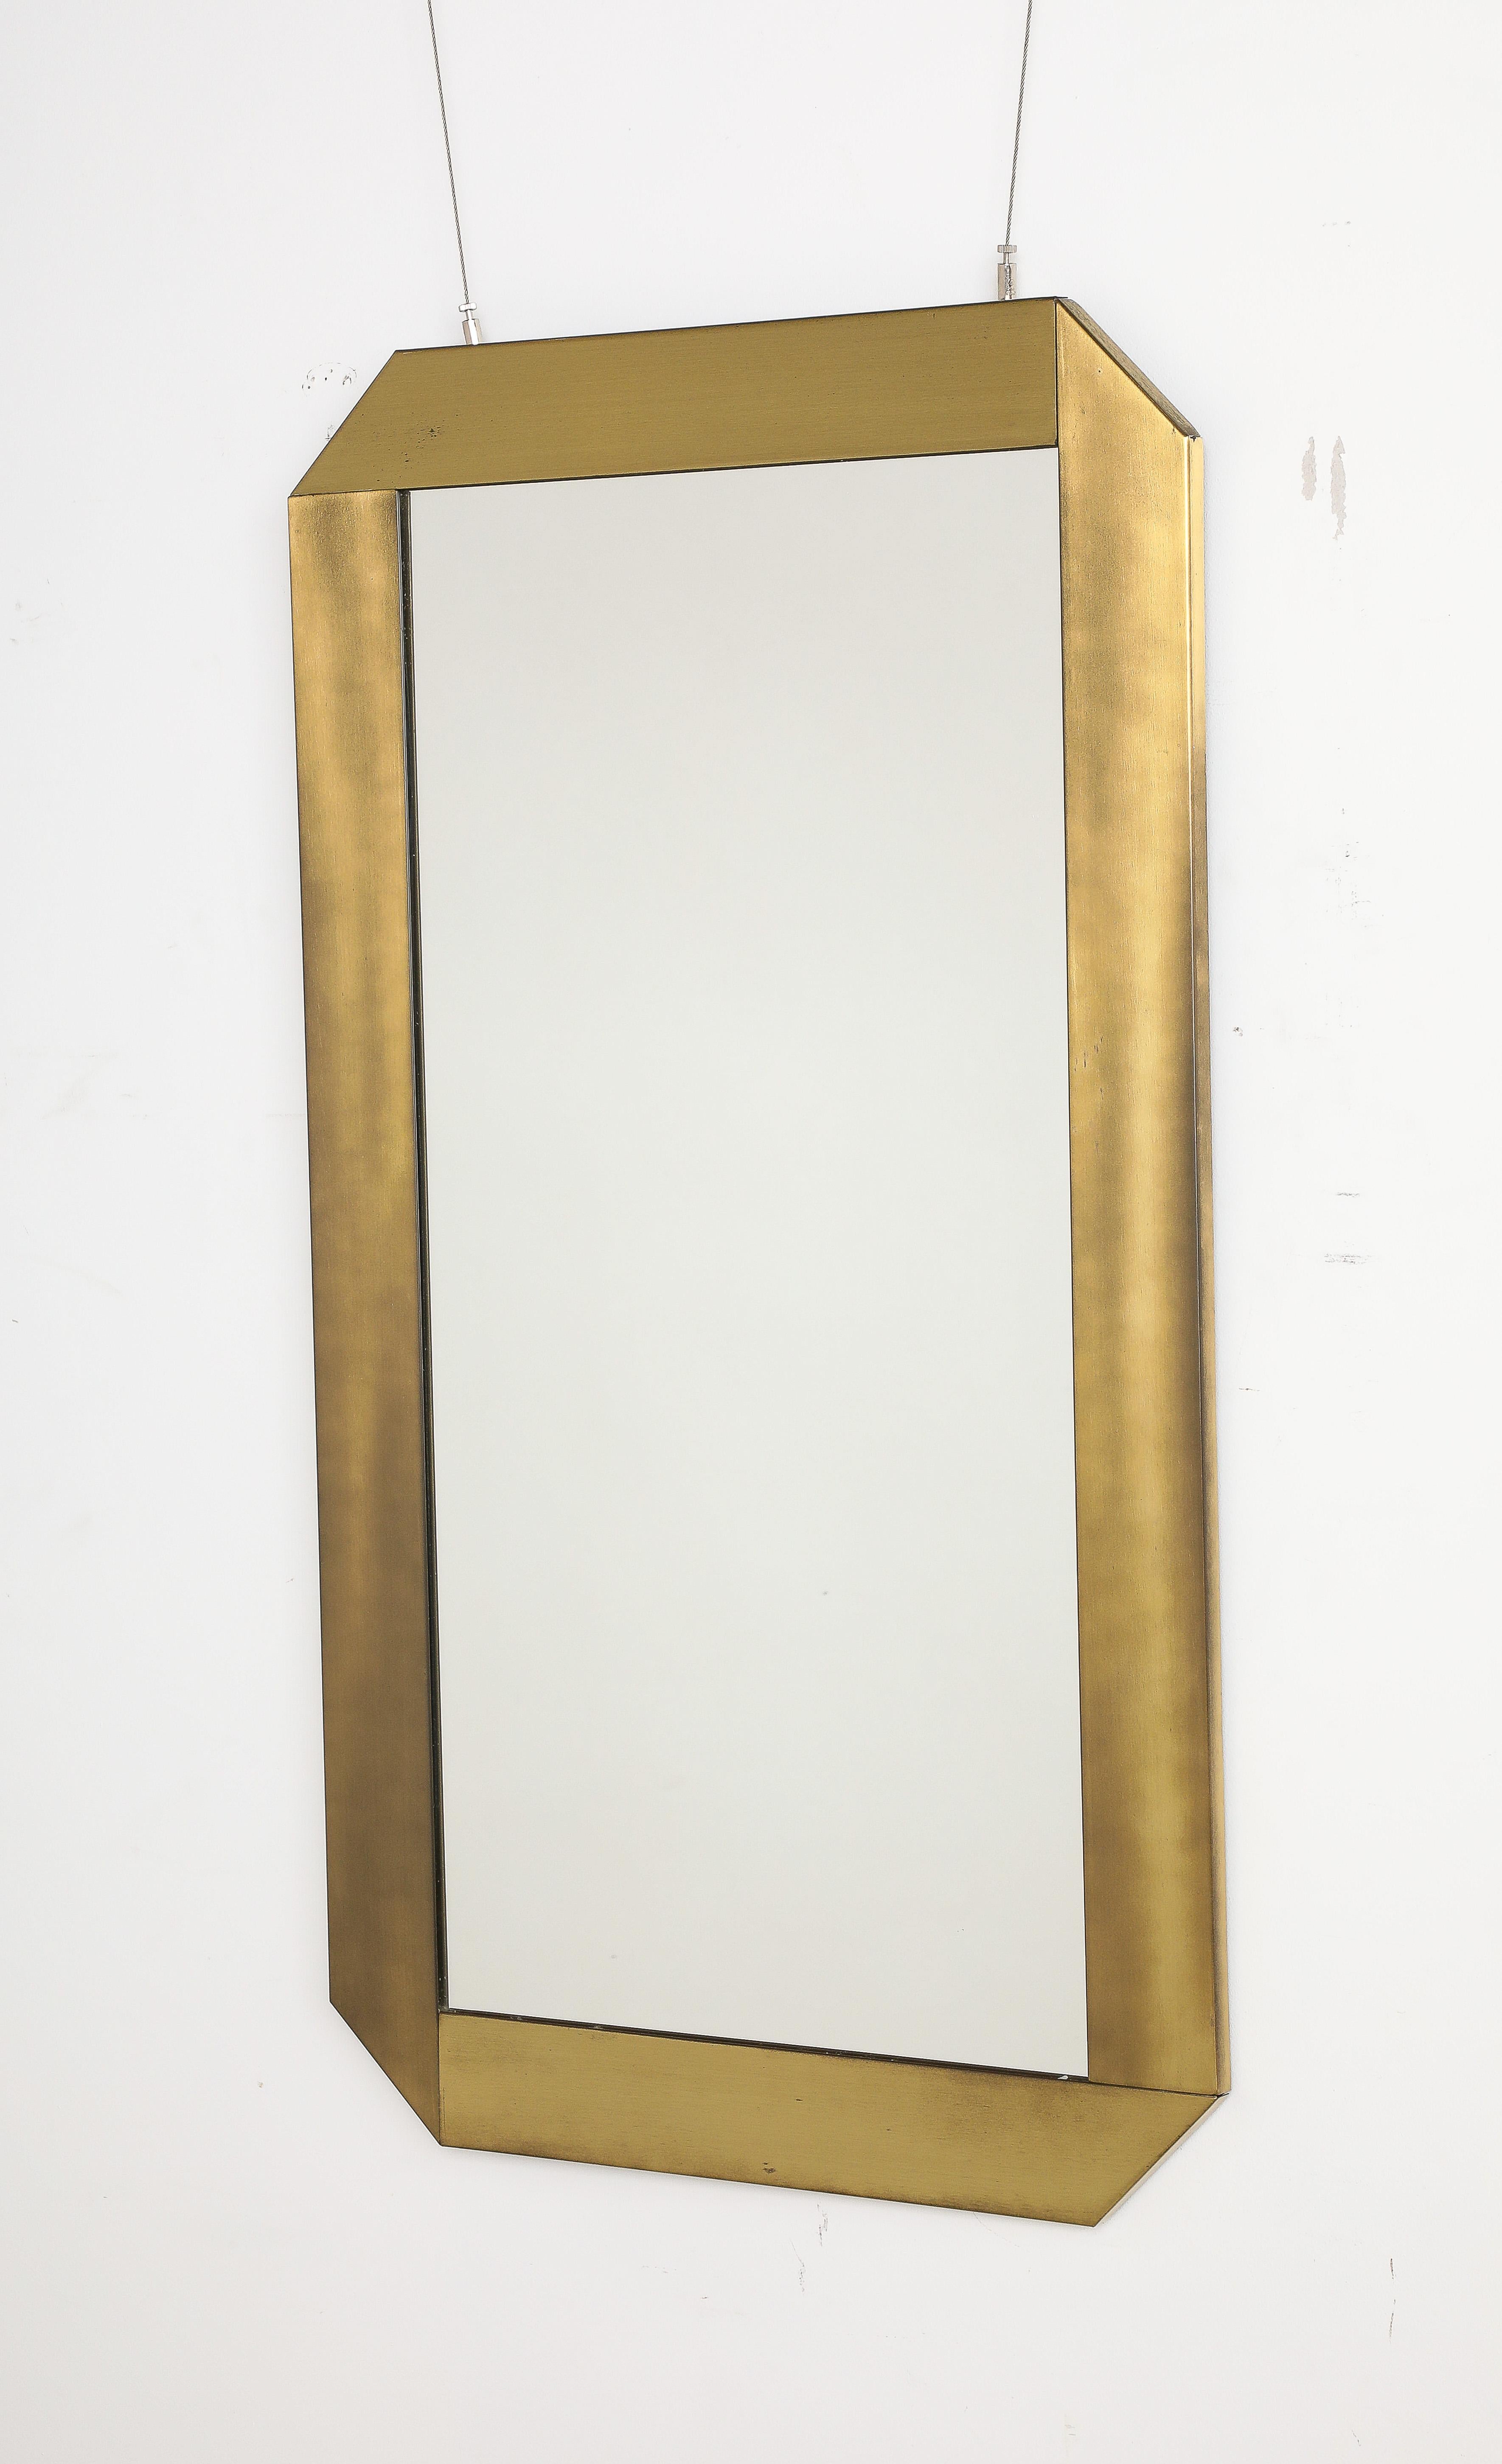 Gaetano Sciolari for Valenti Milano Brushed Brass Wall Mirror, Italy, circa 1970

An Italian 1970's brushed brass rectangular wall mirror with canted corners, designed by Gaetano Sciolari for Valenti Milano. The brass a warm and rich coloring,